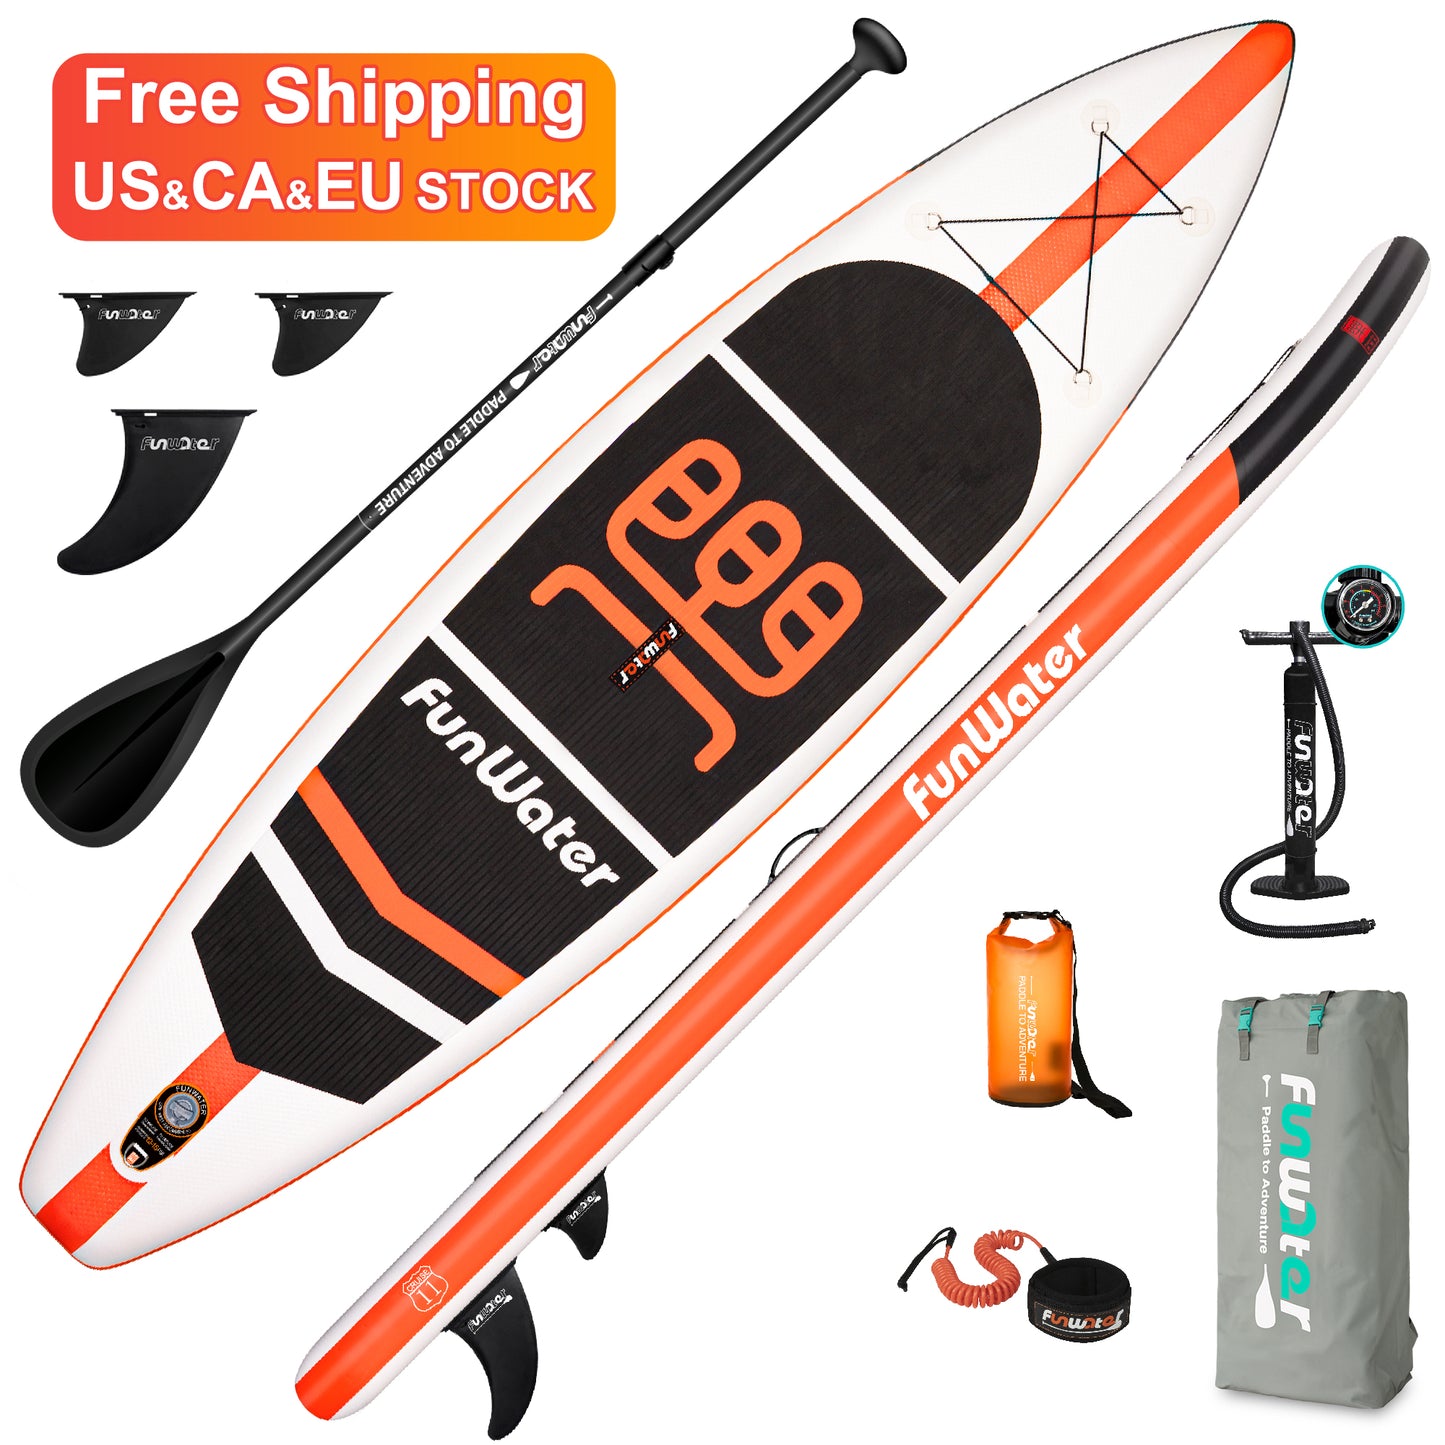 FUNWATER OEM 11' inflatable sup paddle board soft boards surf stand up paddle board - AFFORDABLE MARKET